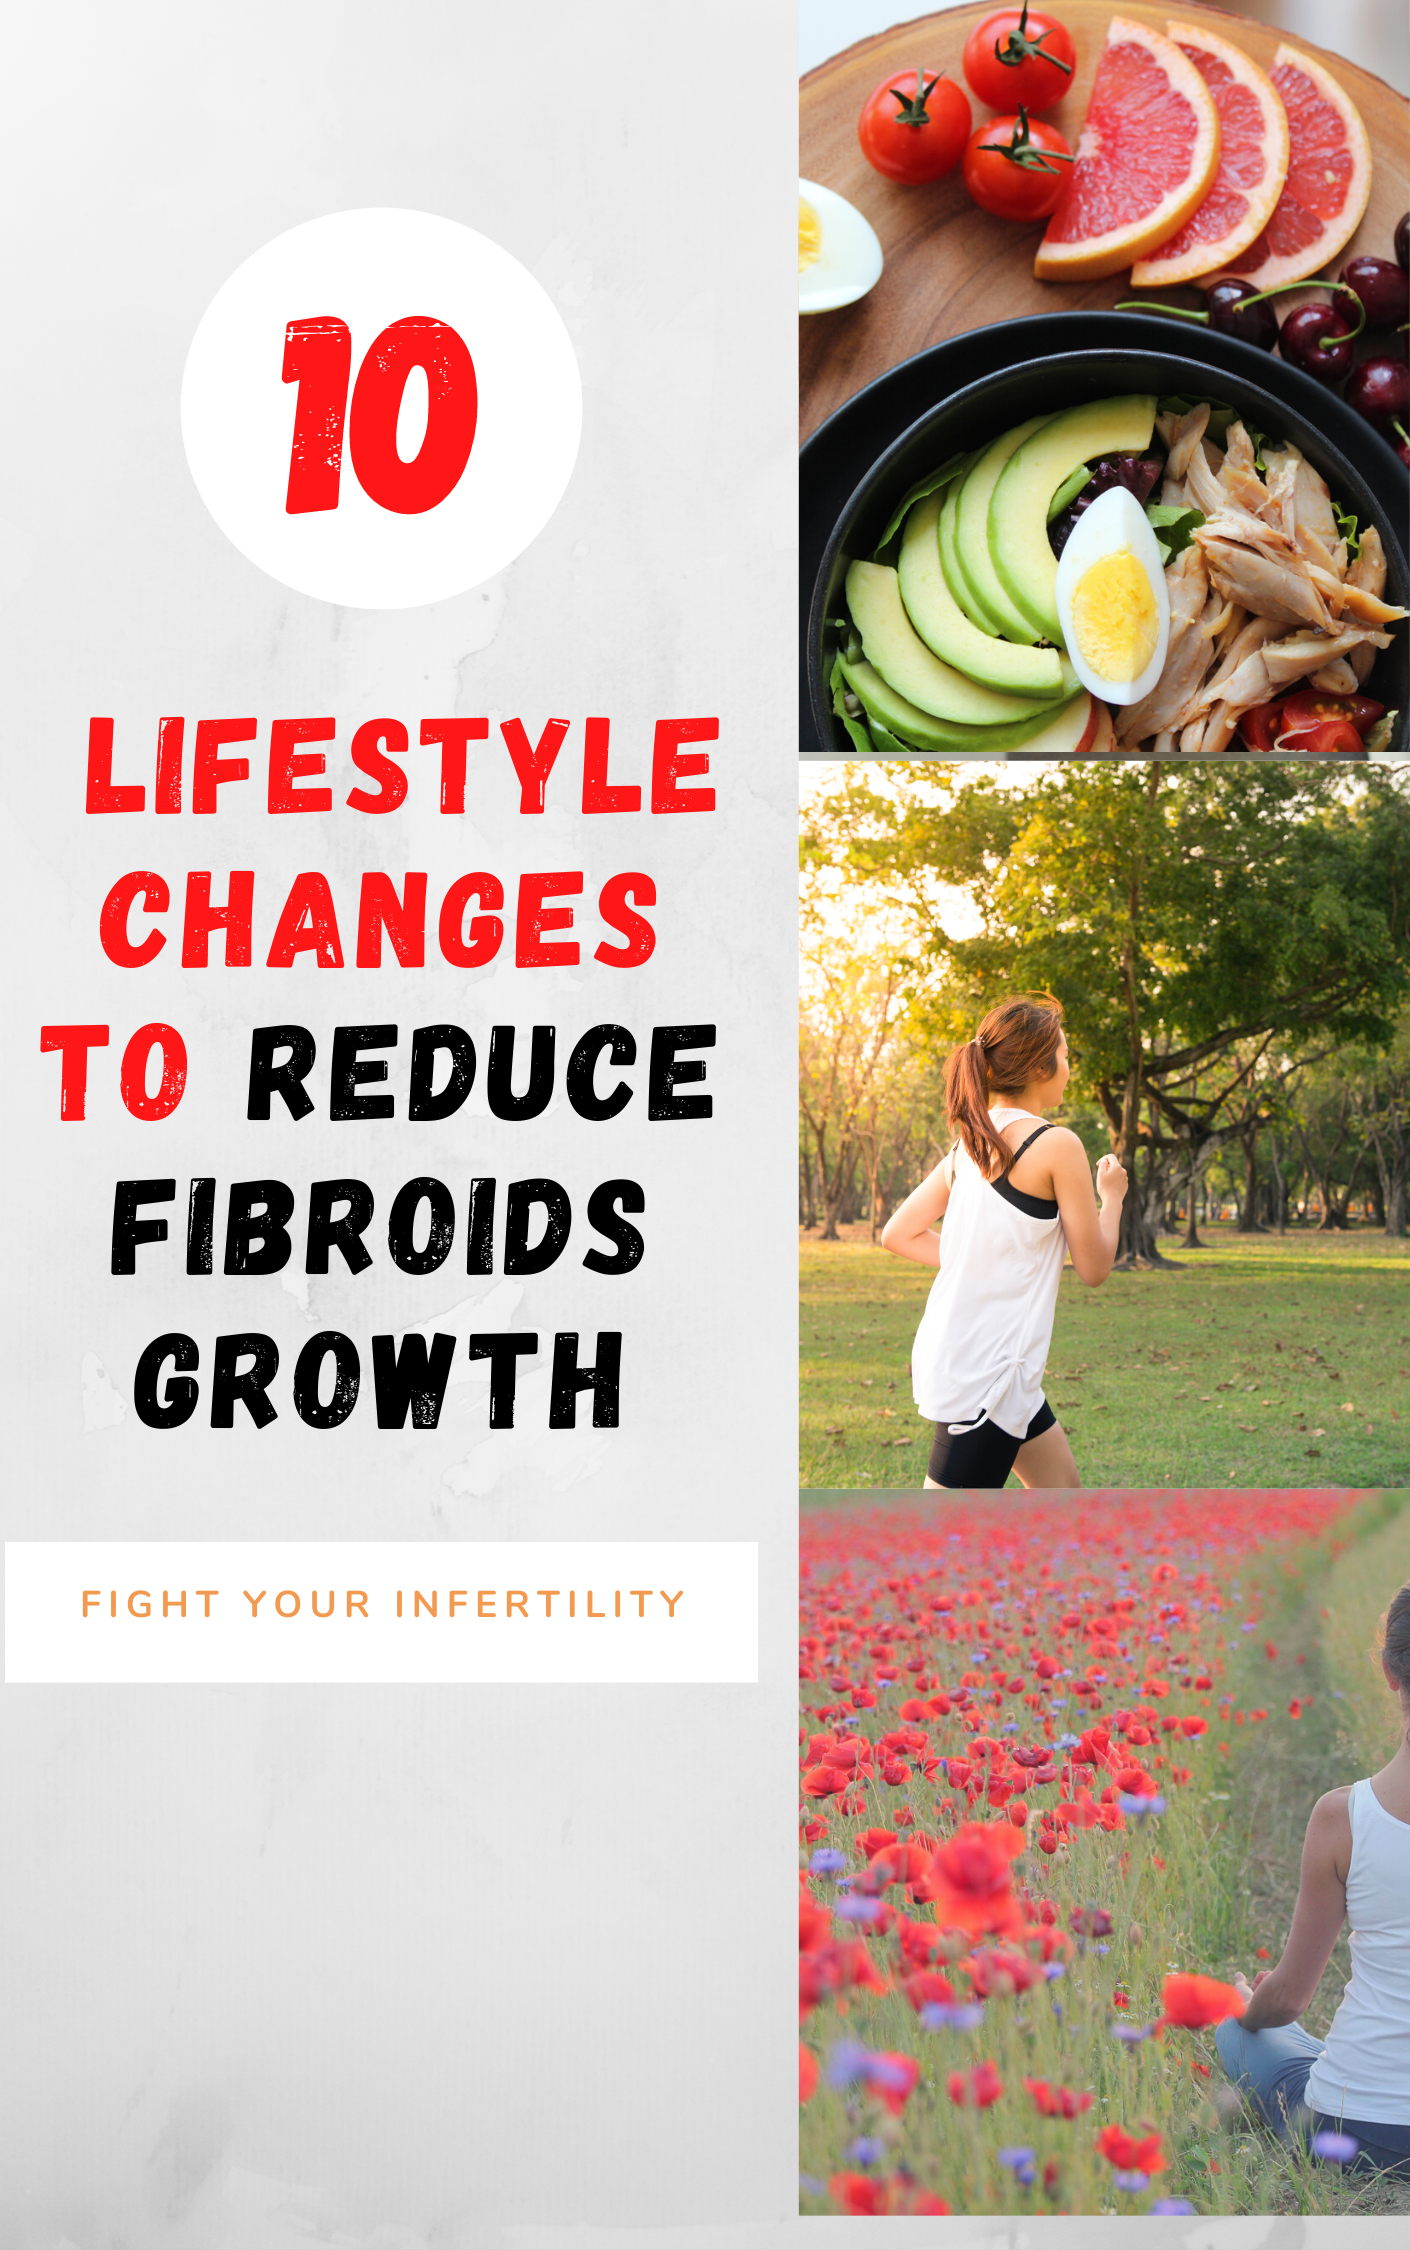 10 Lifestyle Changes to Reduce Fibroids Growth